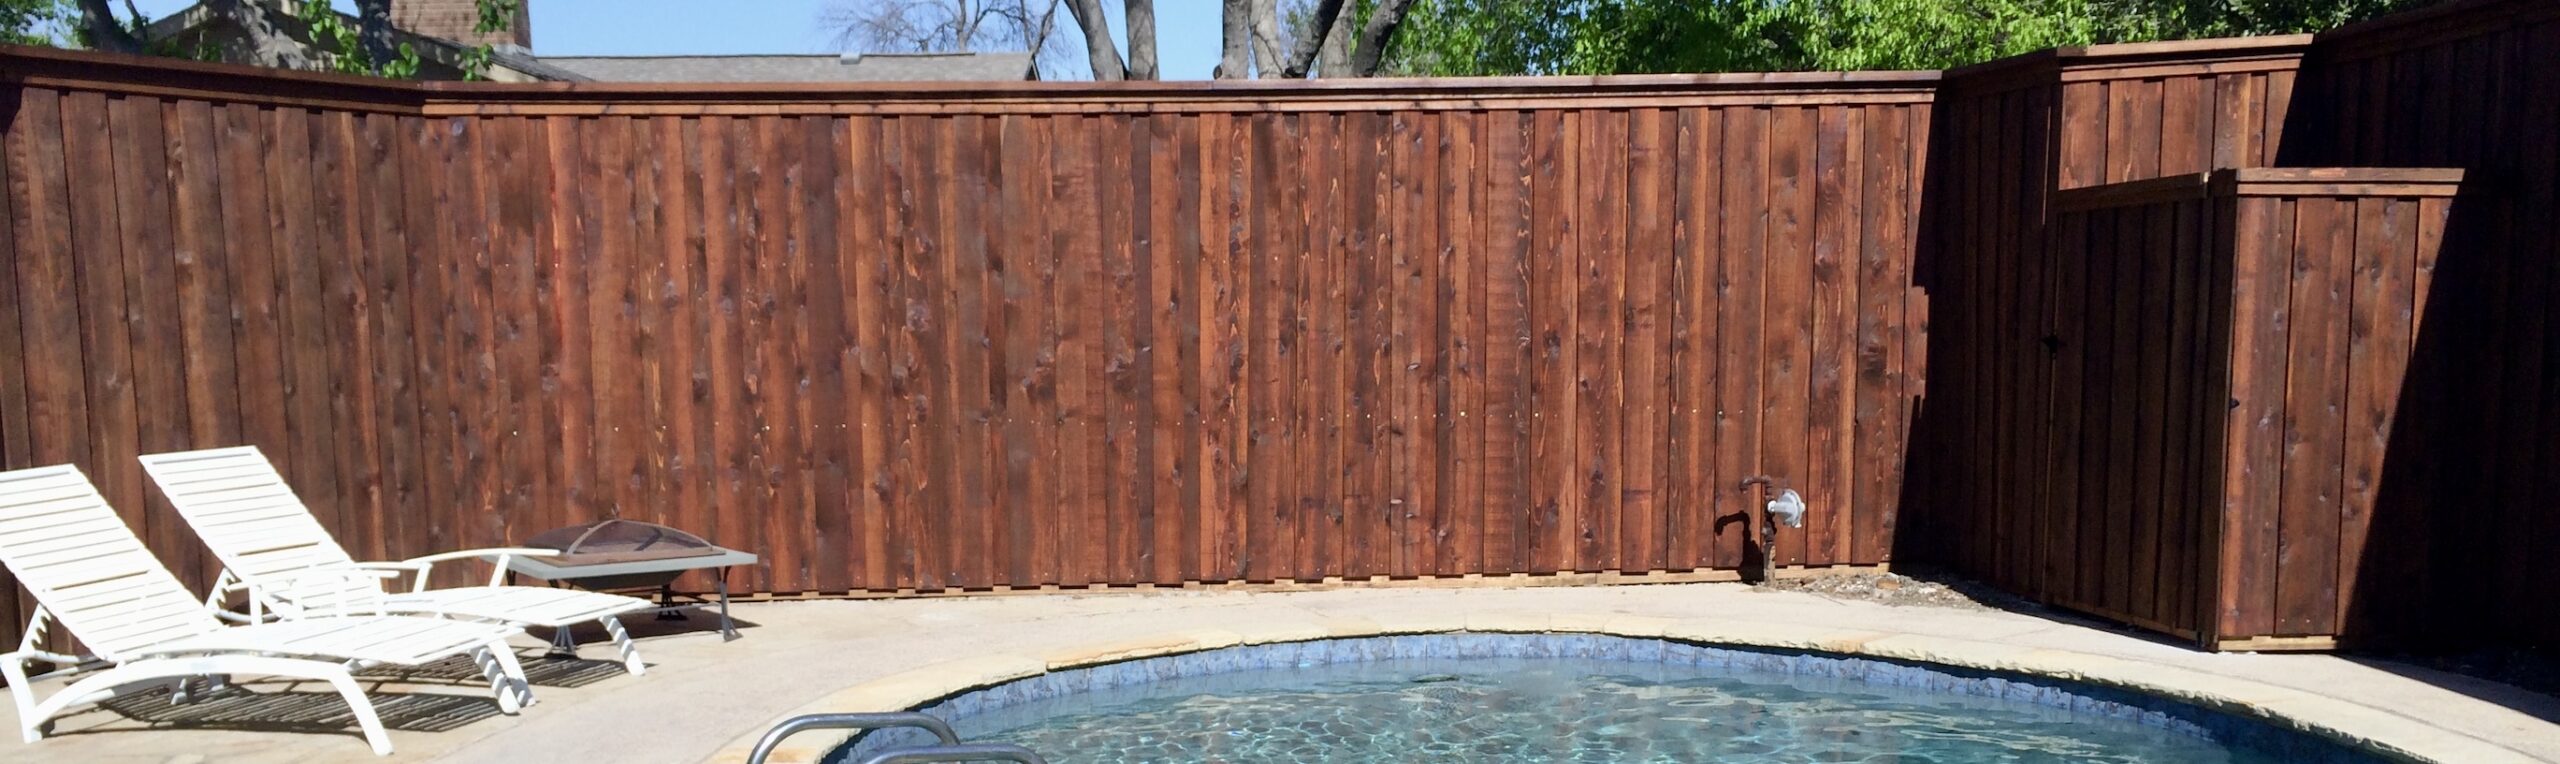 Fence Companies Lewisville TX | Privacy Fences Wood Fences Wrought Iron Fences | Lewisville Fence Companies